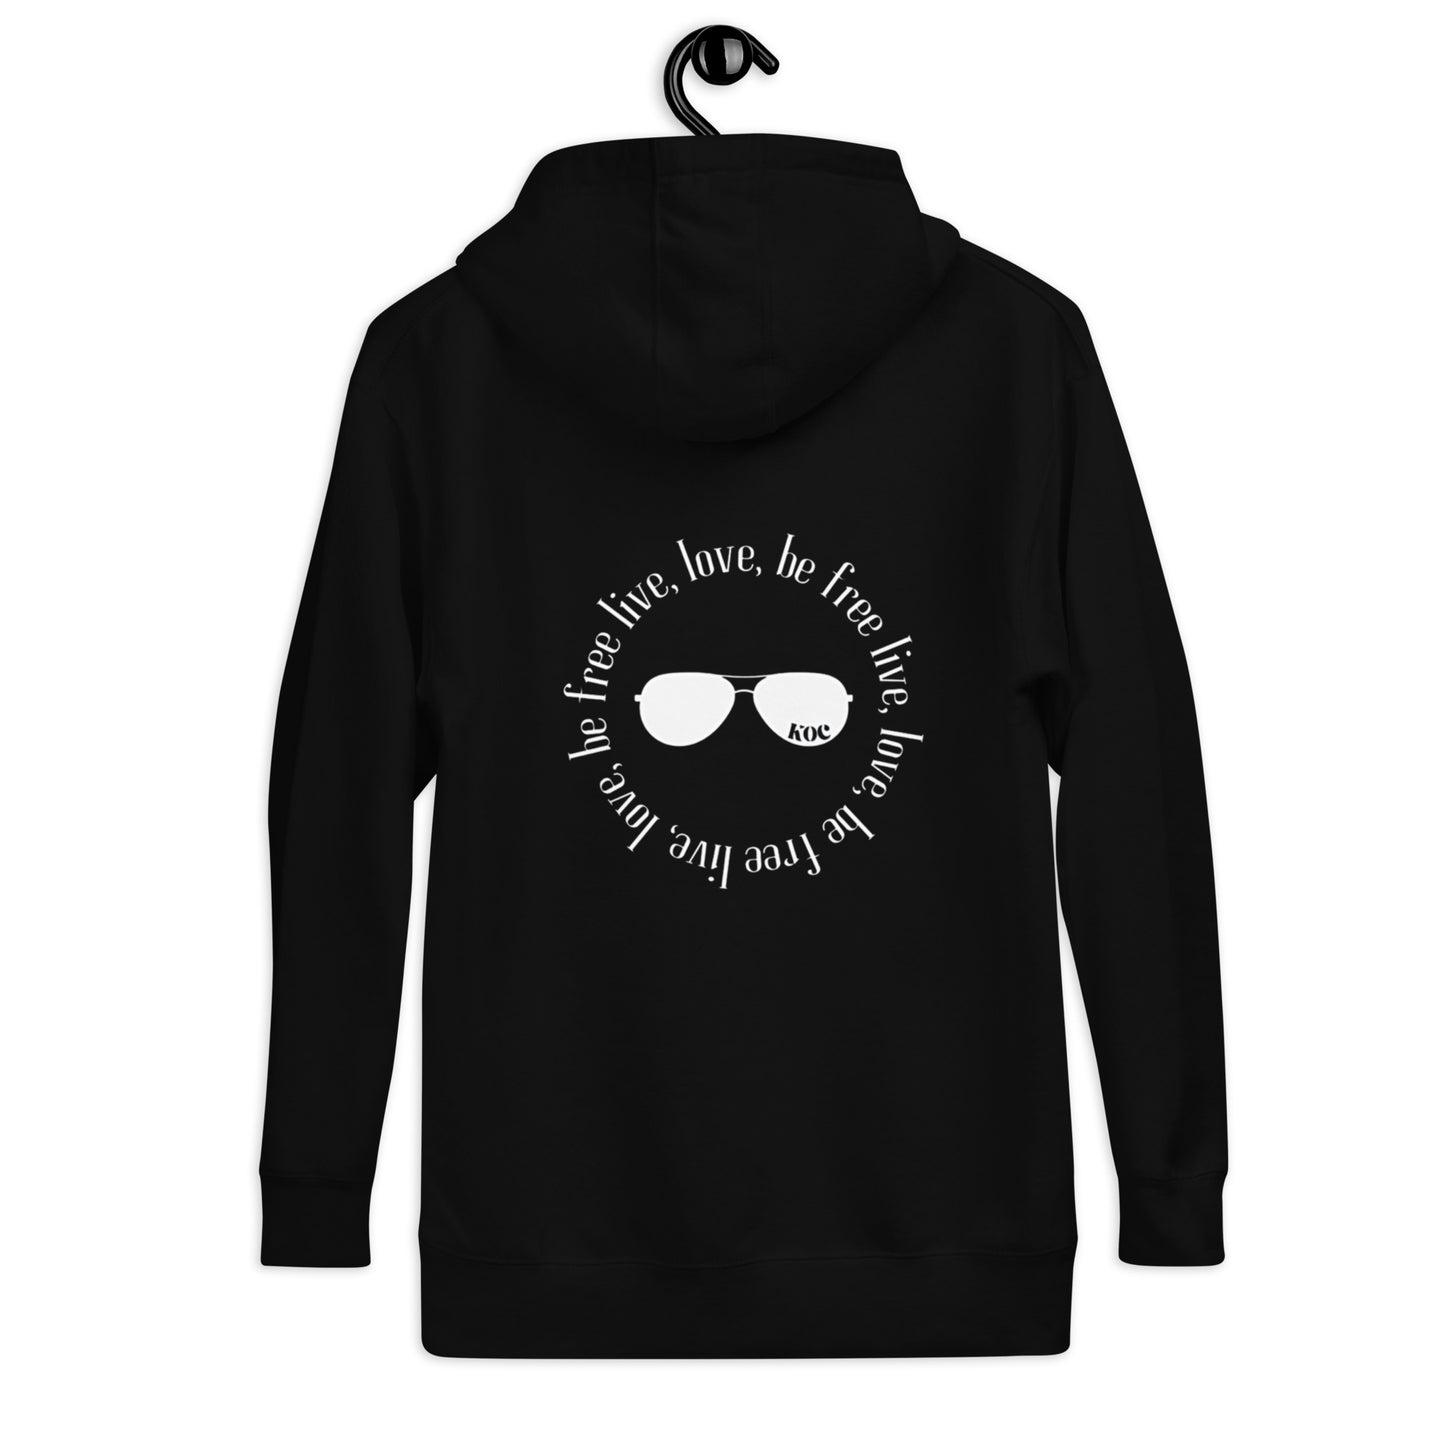 Live, Love and Be Free Black Unisex Hoodie